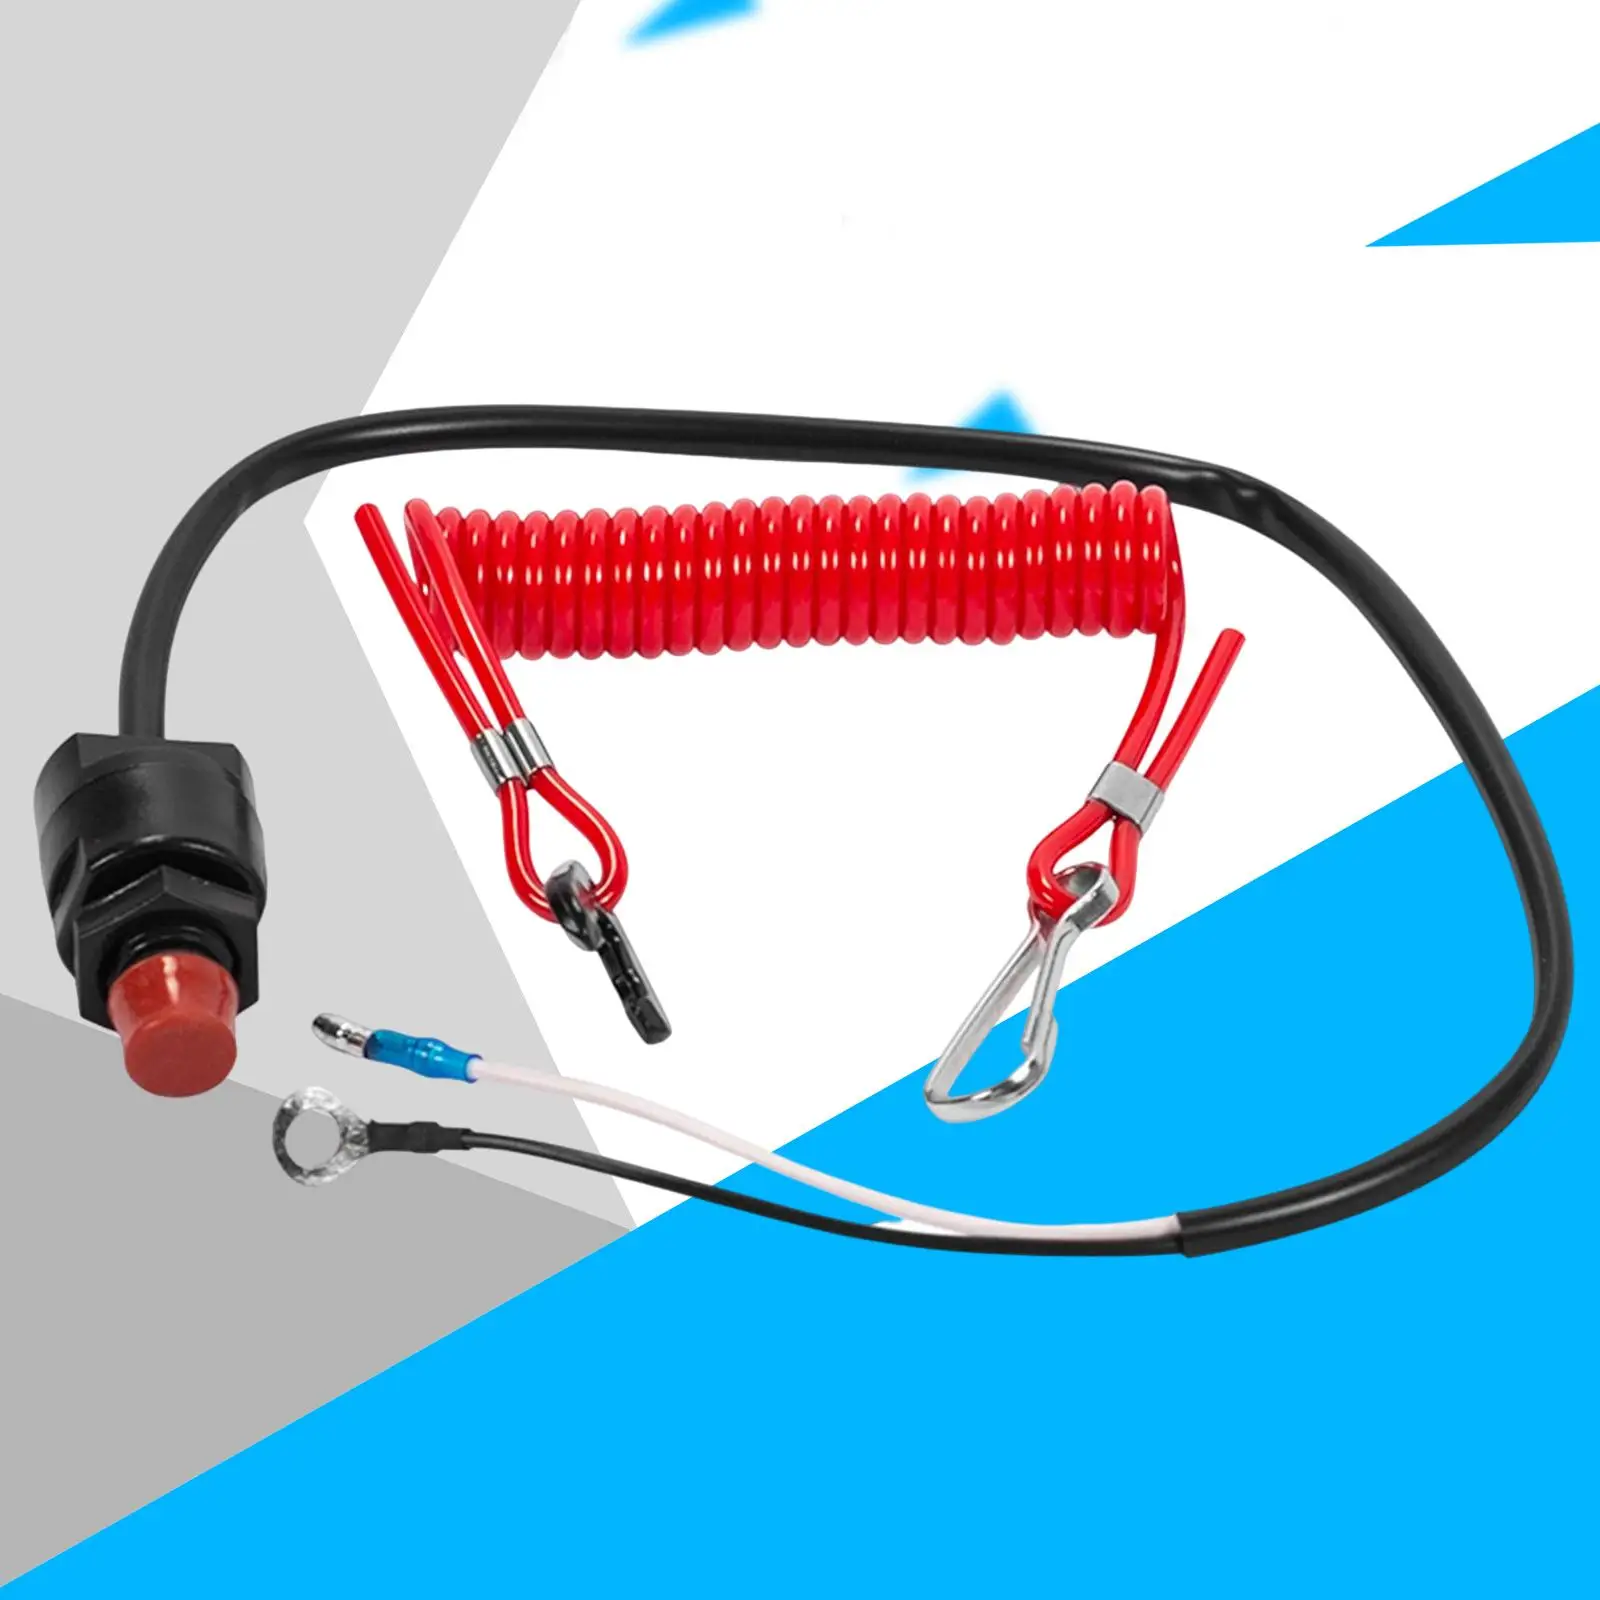 Flameout Switch Key Lanyard Red Tether Lanyard for Boat Outboard